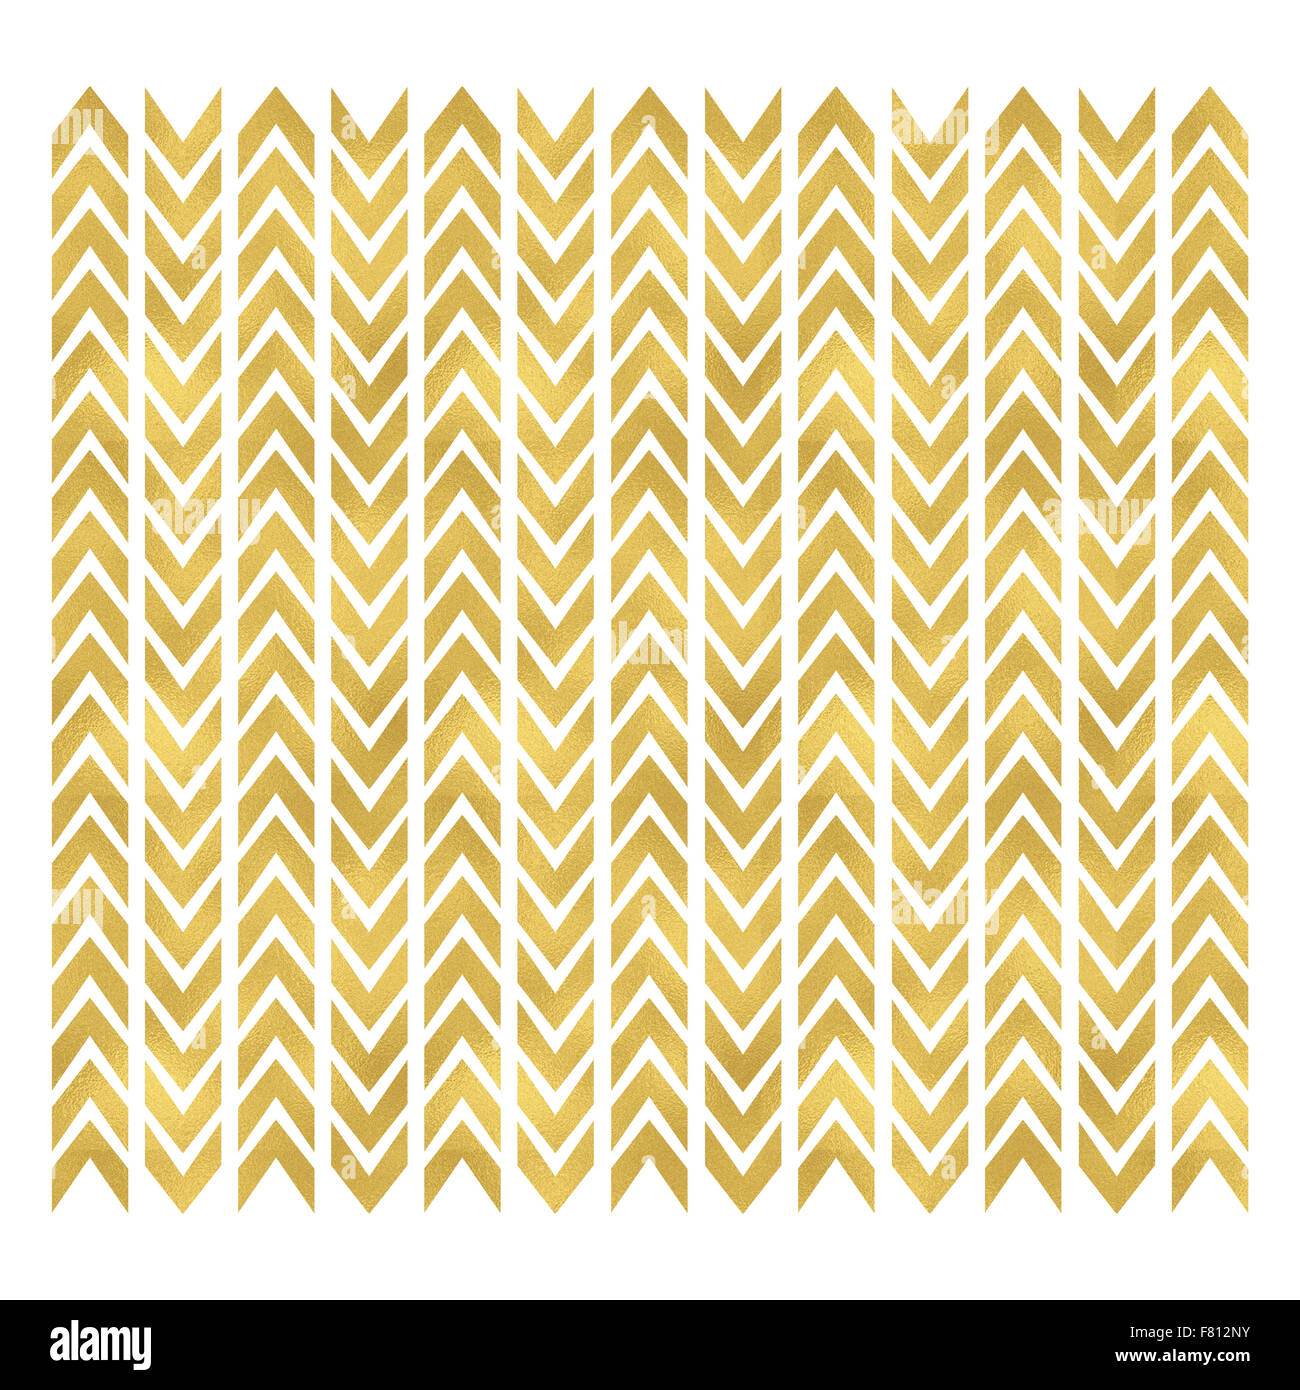 Image of a gold colored chevron pattern background. Stock Photo